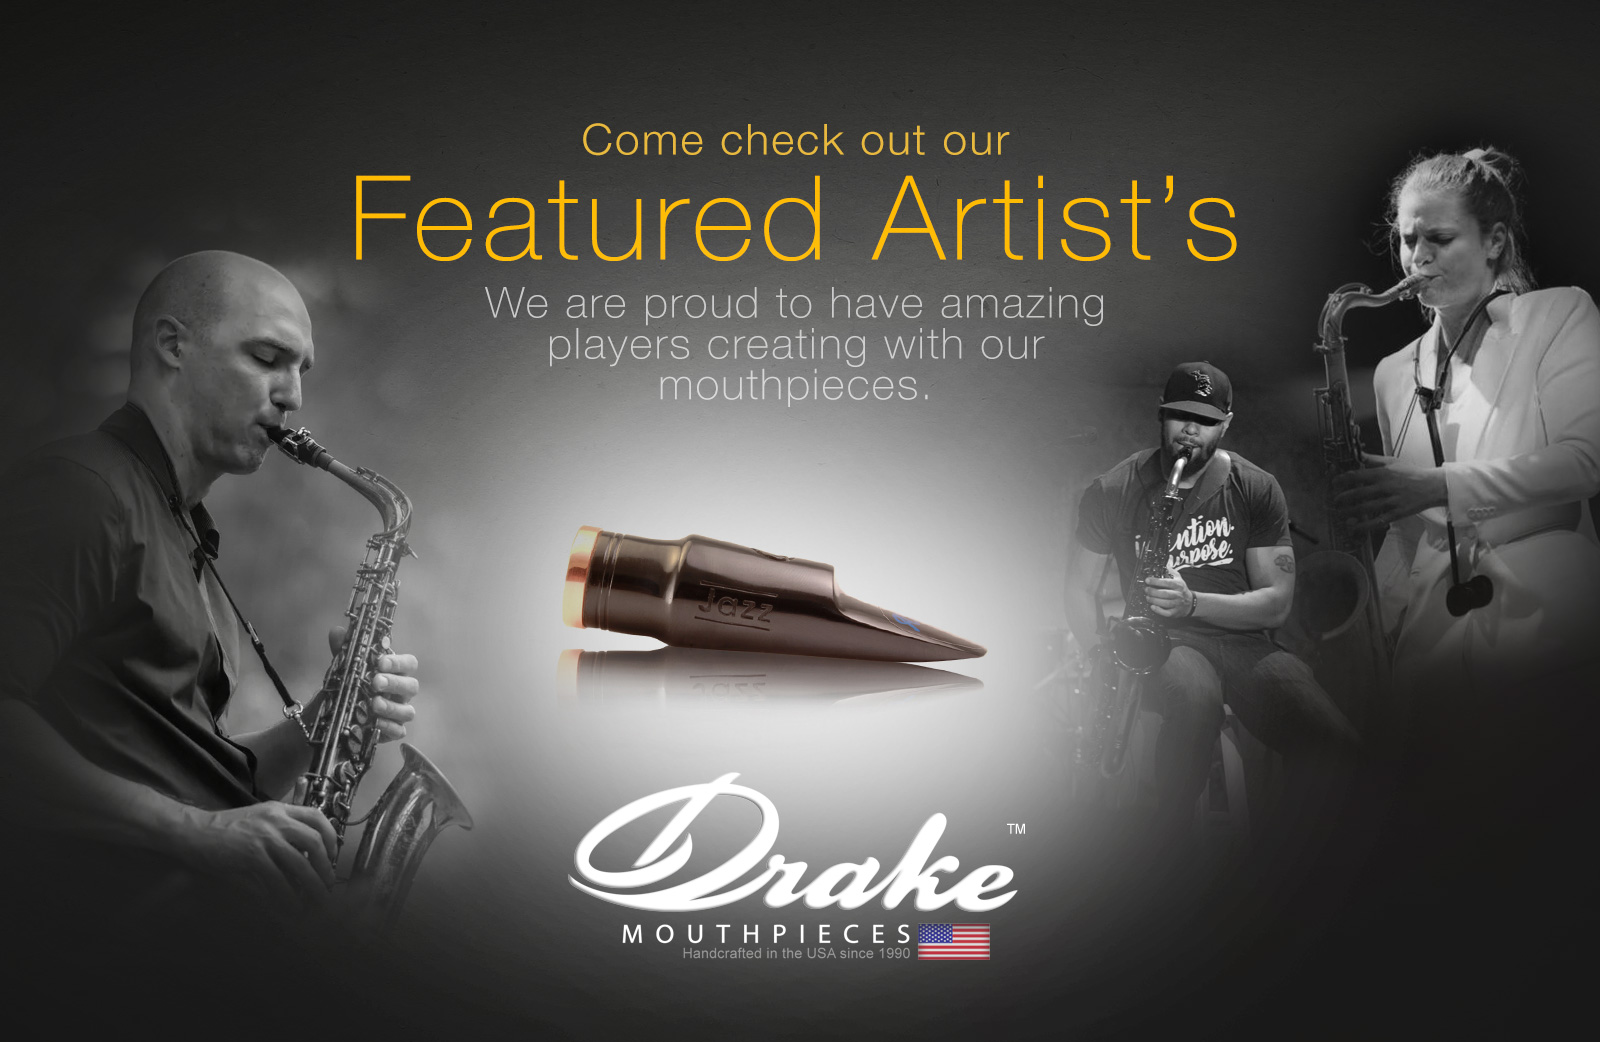 Drake Saxophone Mouthpieces Featured Artists